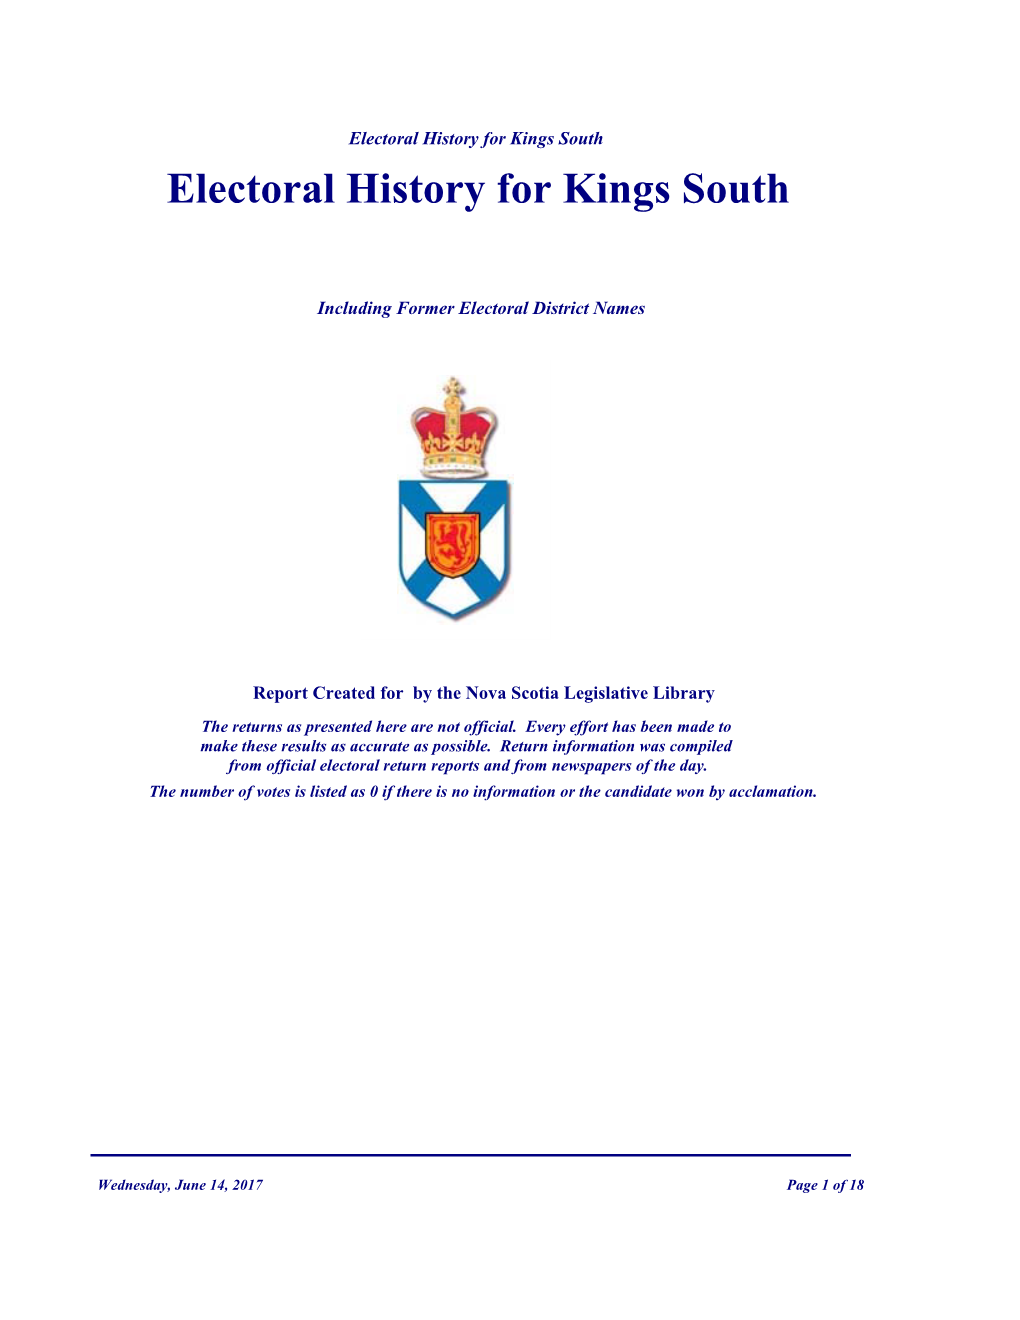 Electoral History for Kings South Electoral History for Kings South